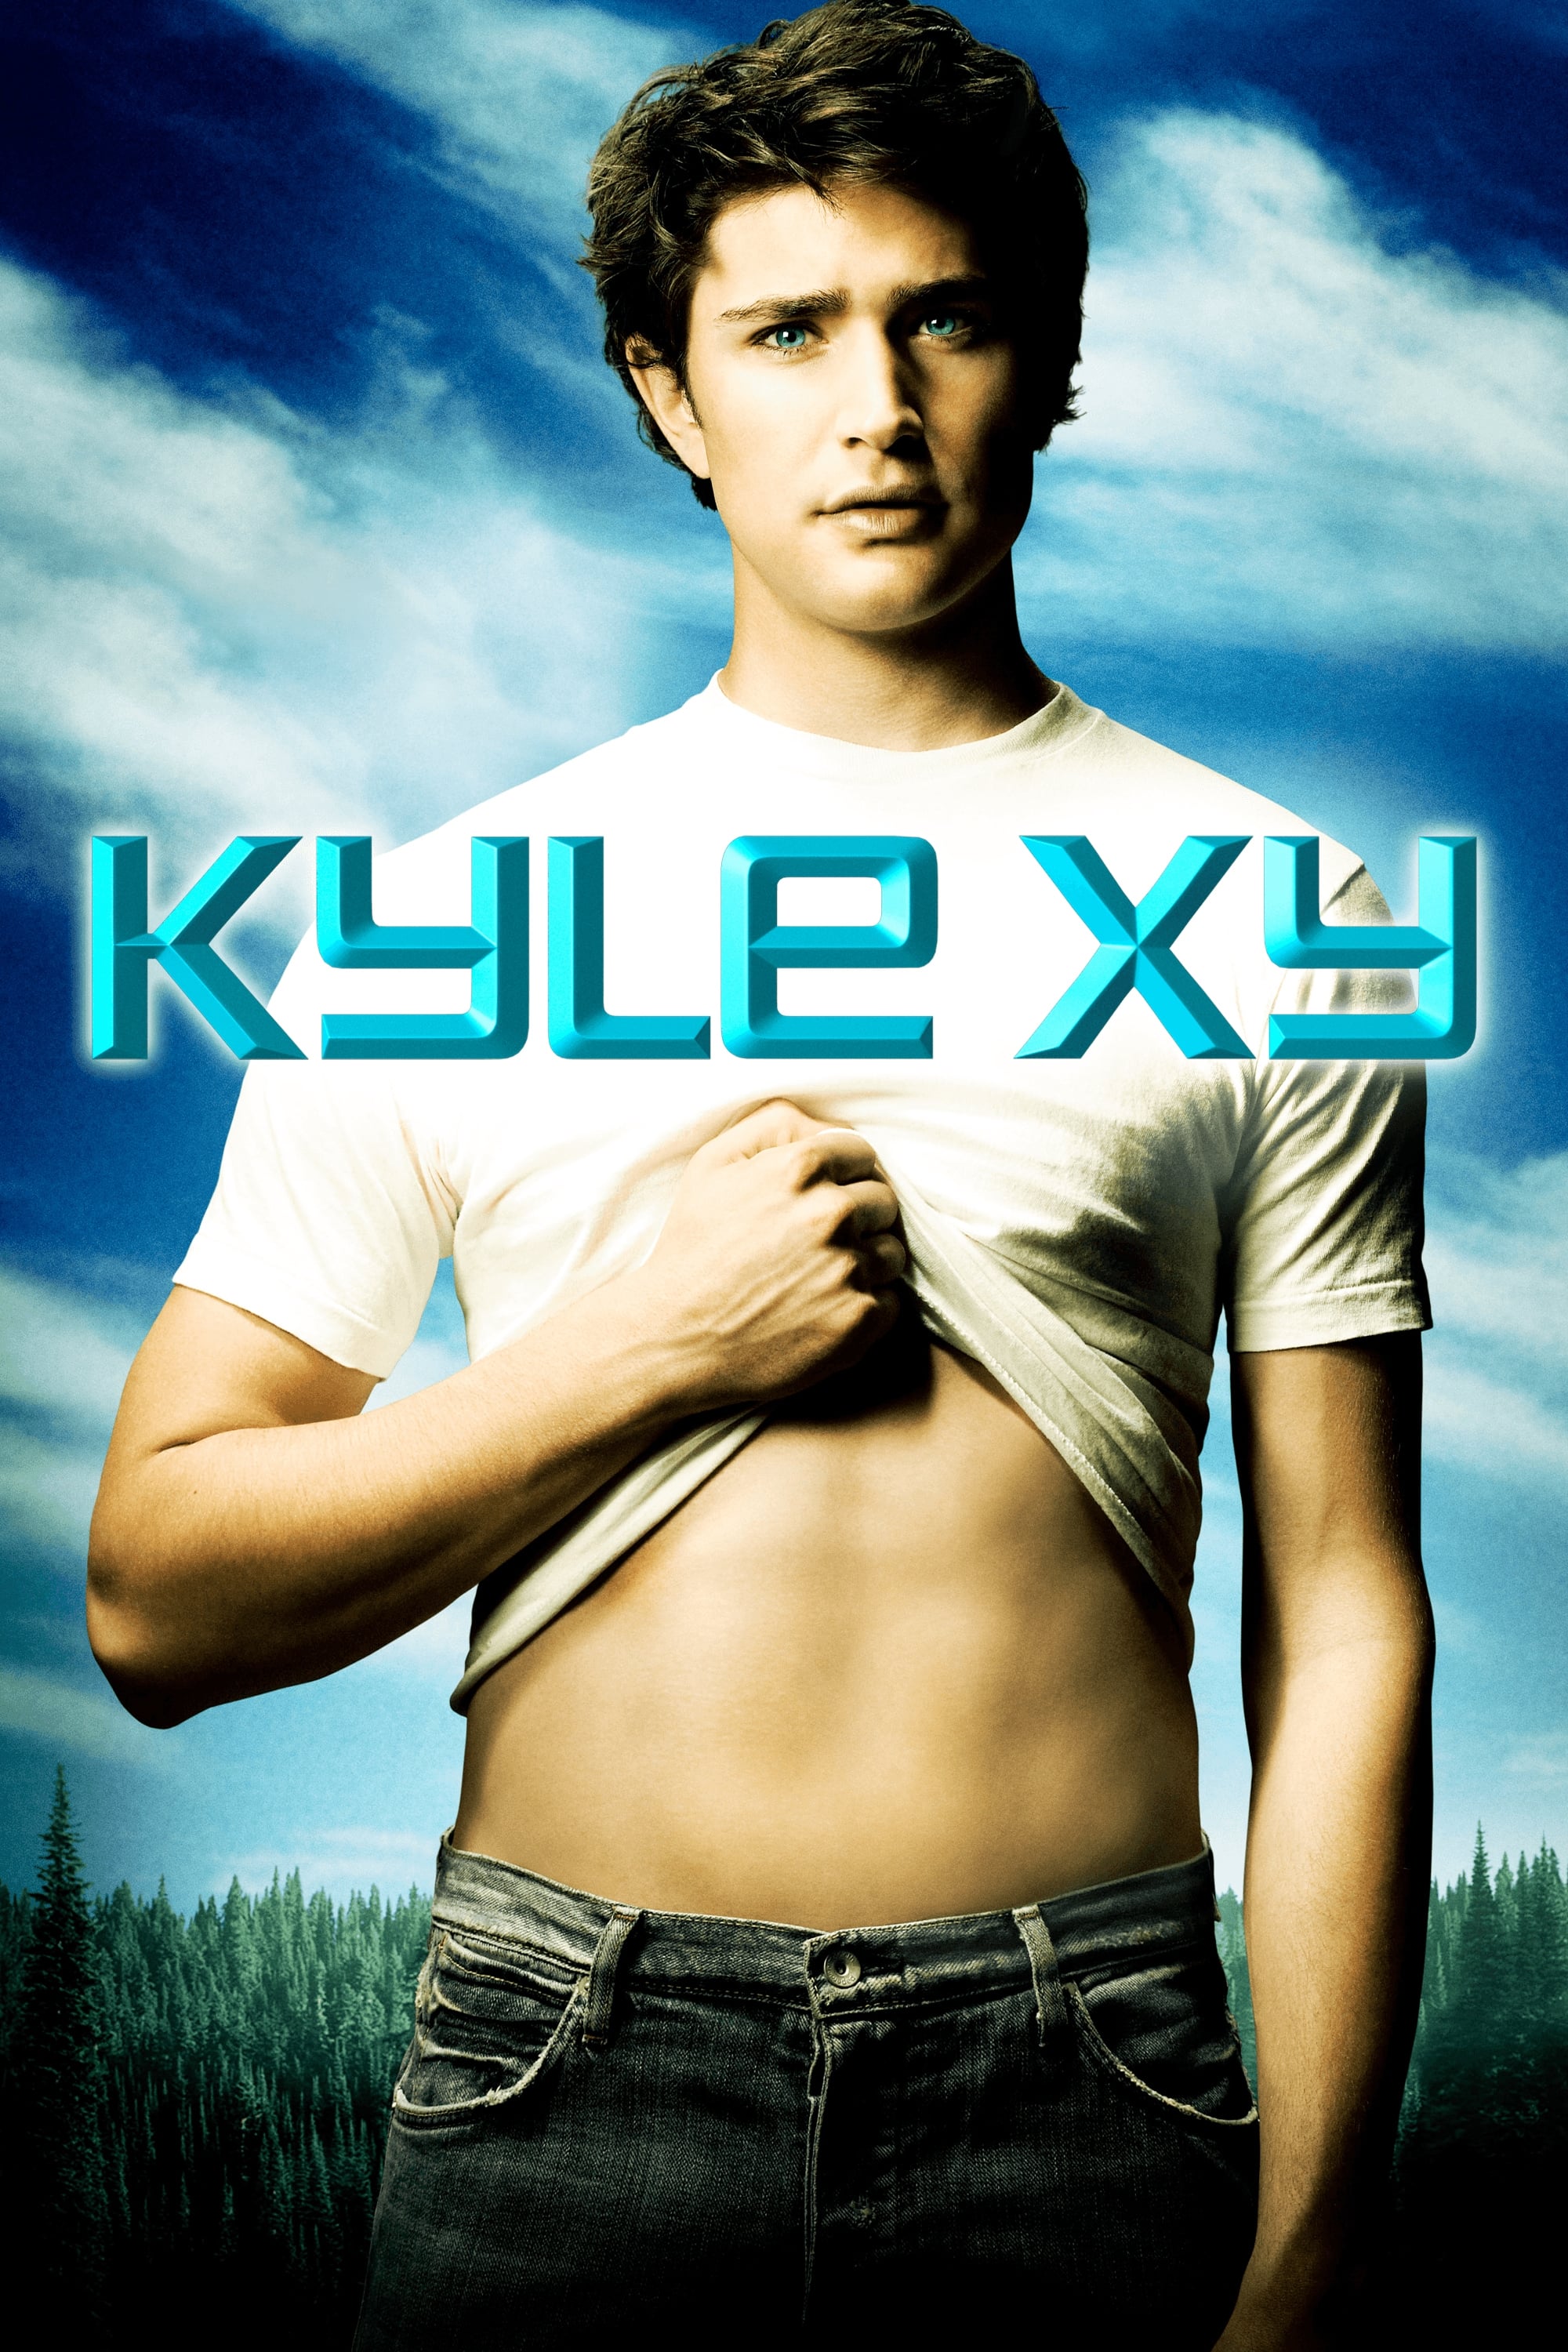 Kyle XY TV Shows About Superhuman